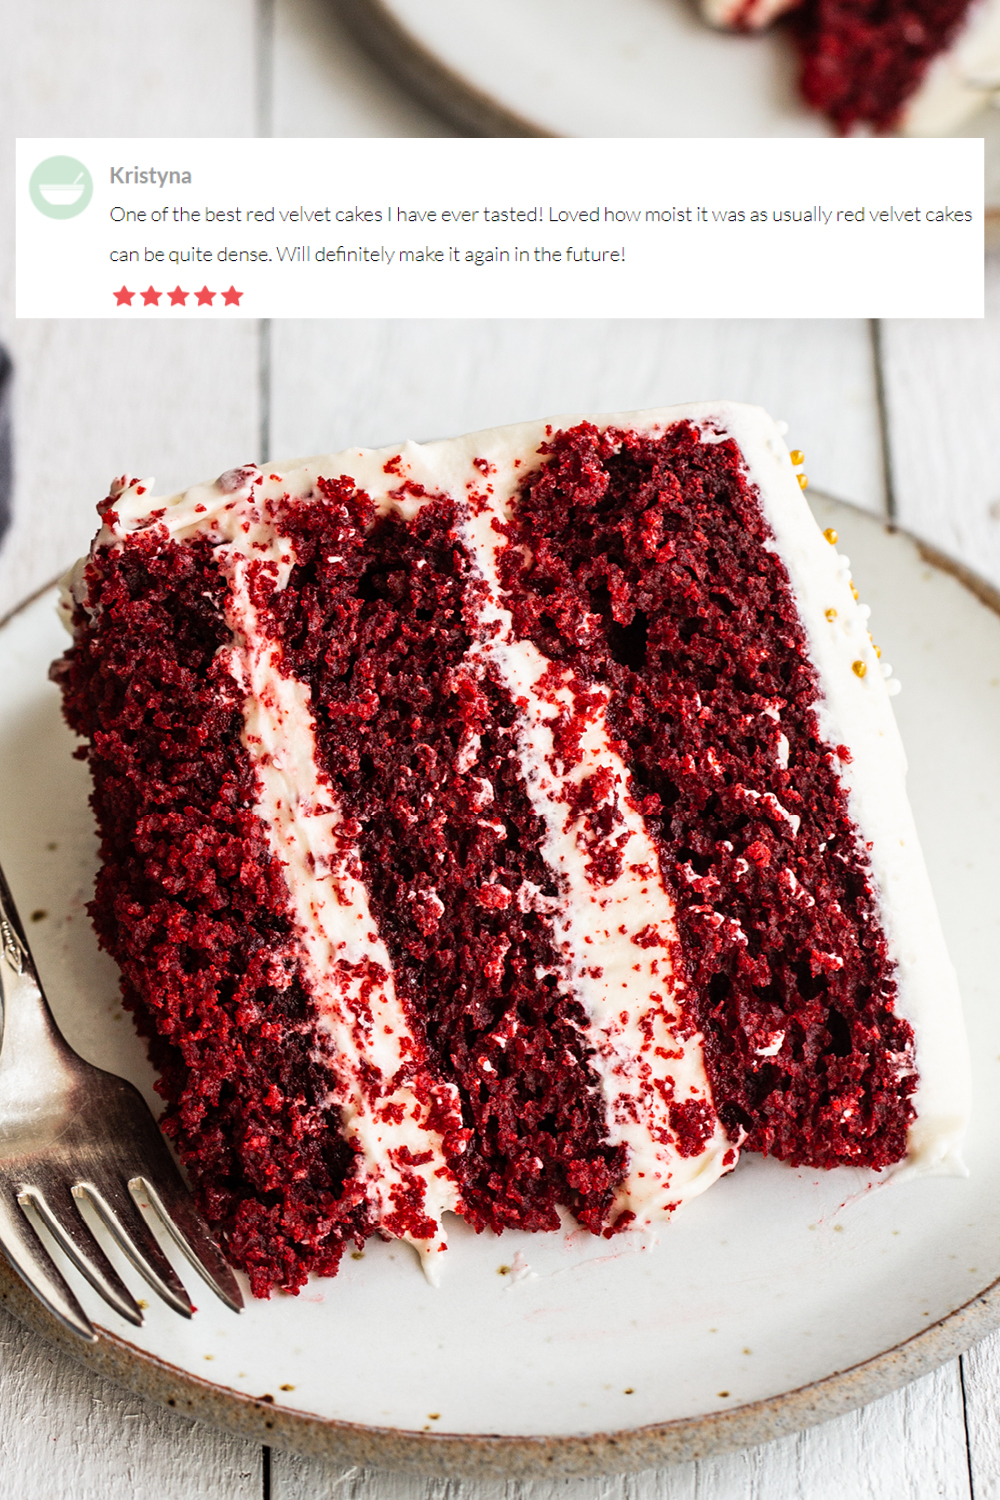 festive look with year-round flavors! Red Velvet Cake is perfect for any Christmas in July get-together